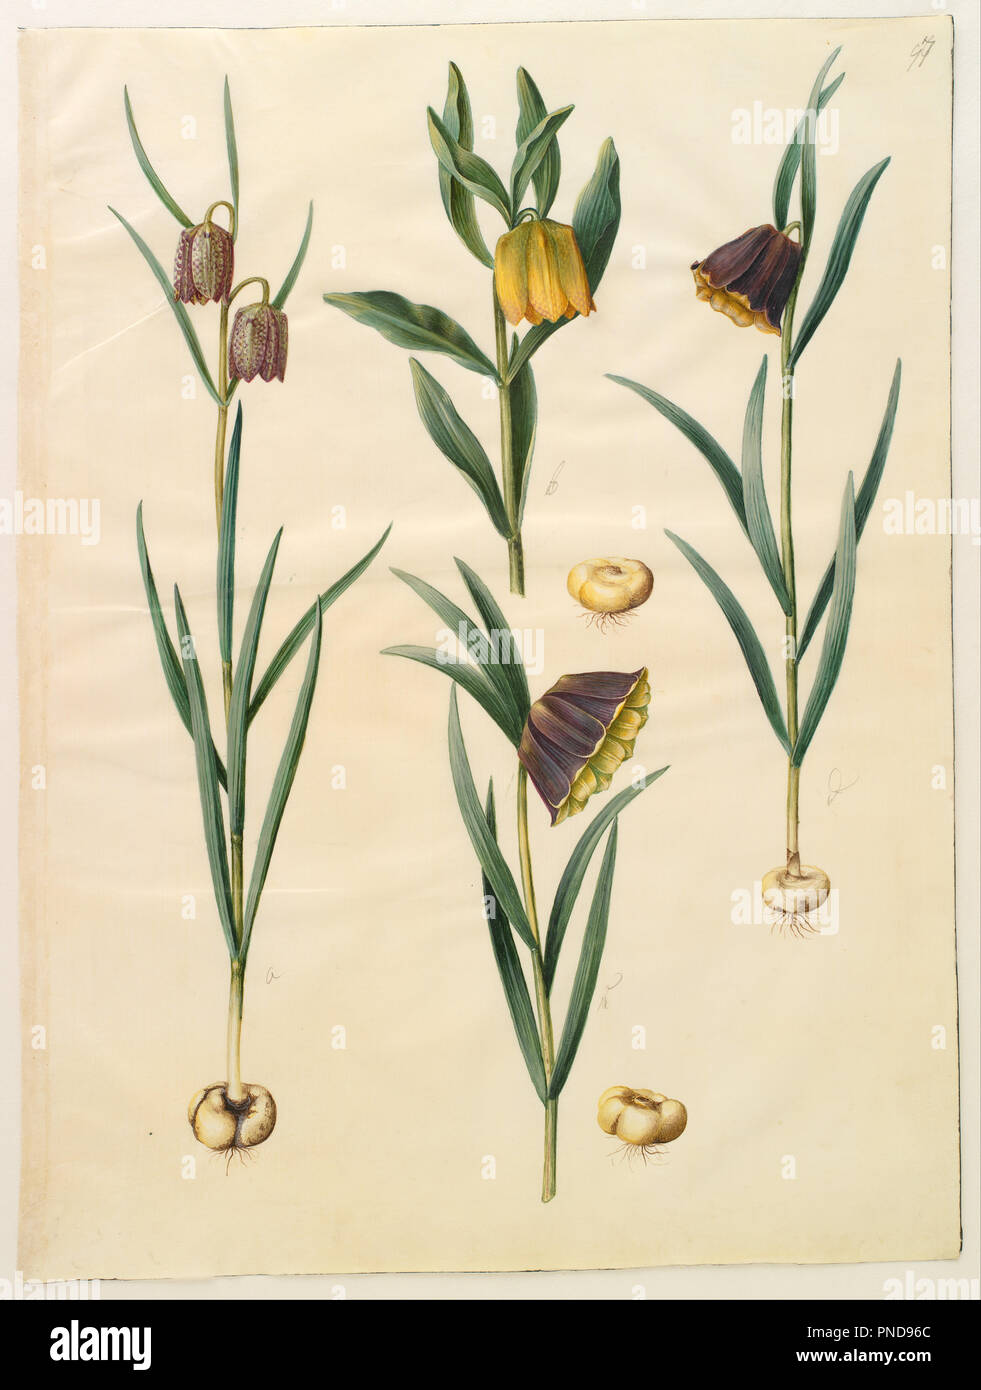 Fritillaria meleagris; Fritullaria lutea eller Fritullaria latifolia var lutea; Fritillaria pyrenaica. Date/Period: From 1649 until 1659. Painting. Gouache. Height: 505 mm (19.88 in); Width: 385 mm (15.15 in). Author: HANS SIMON HOLTZBECKER. Stock Photo